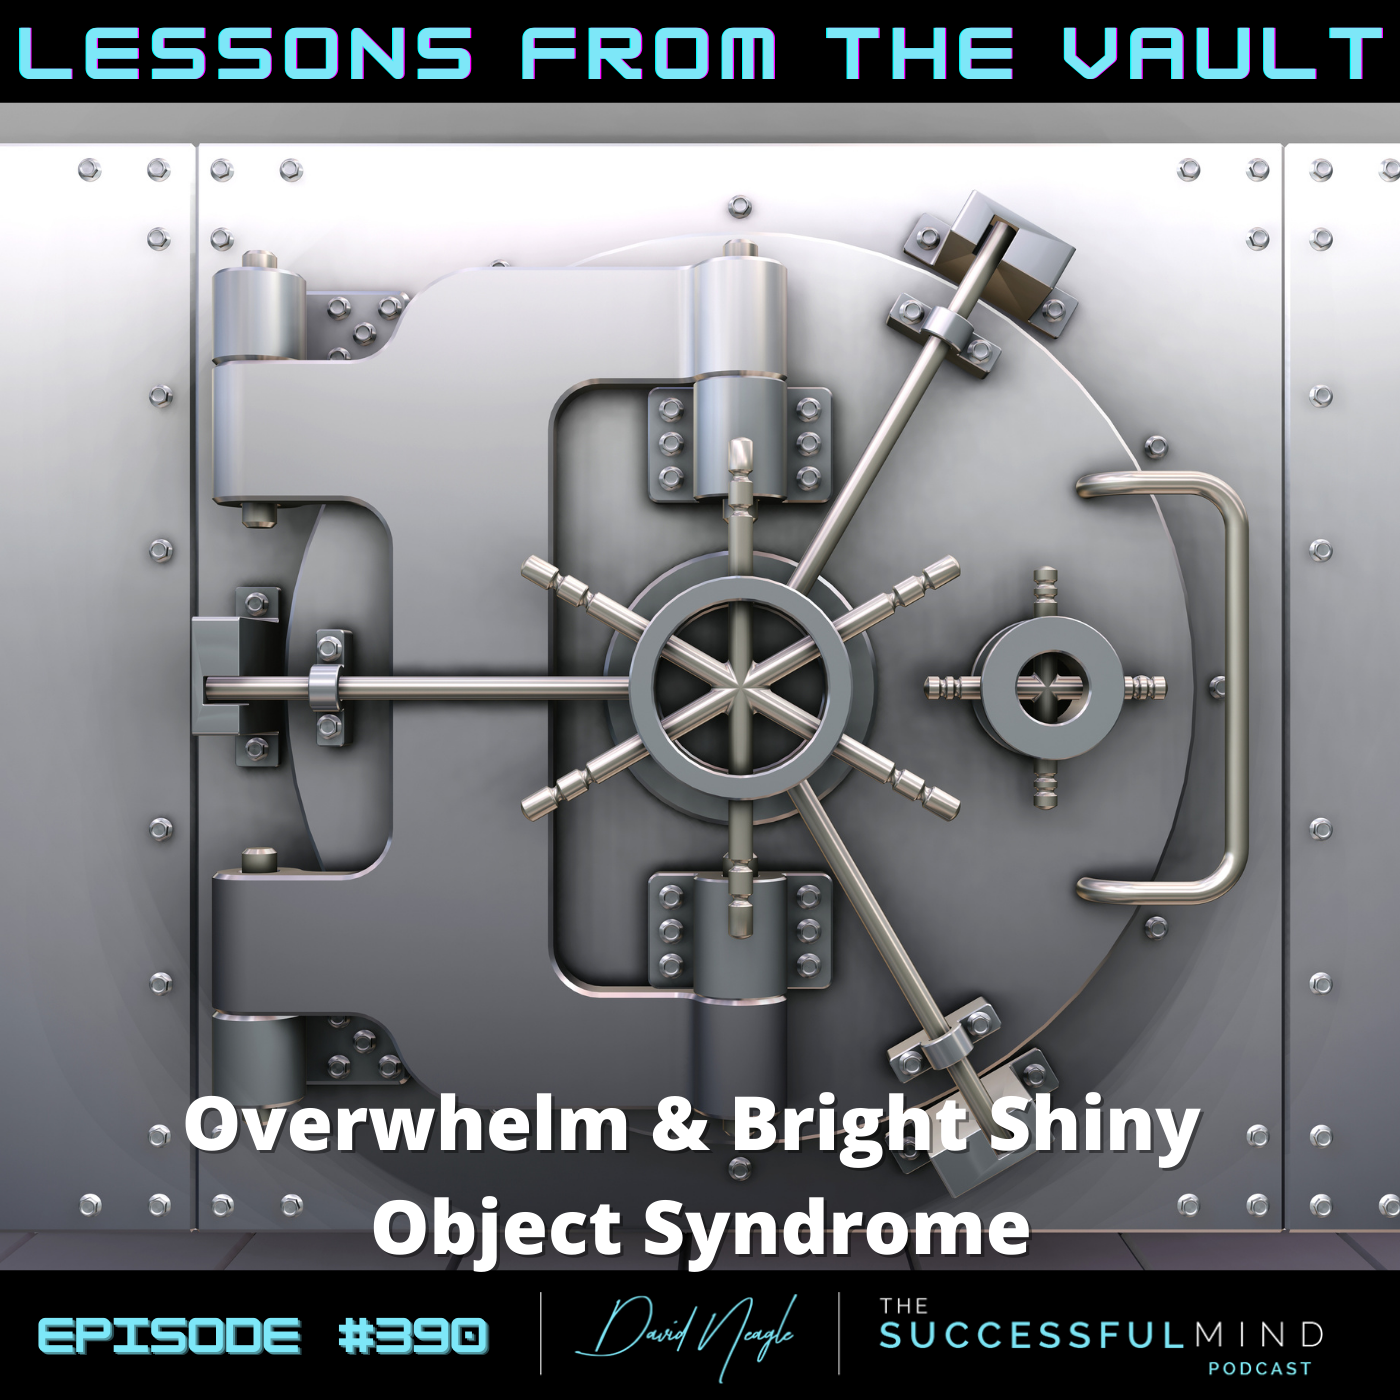 The Successful Mind Podcast- Lessons From The Vault - Overwhelm & Bright Shiny Object Syndrome